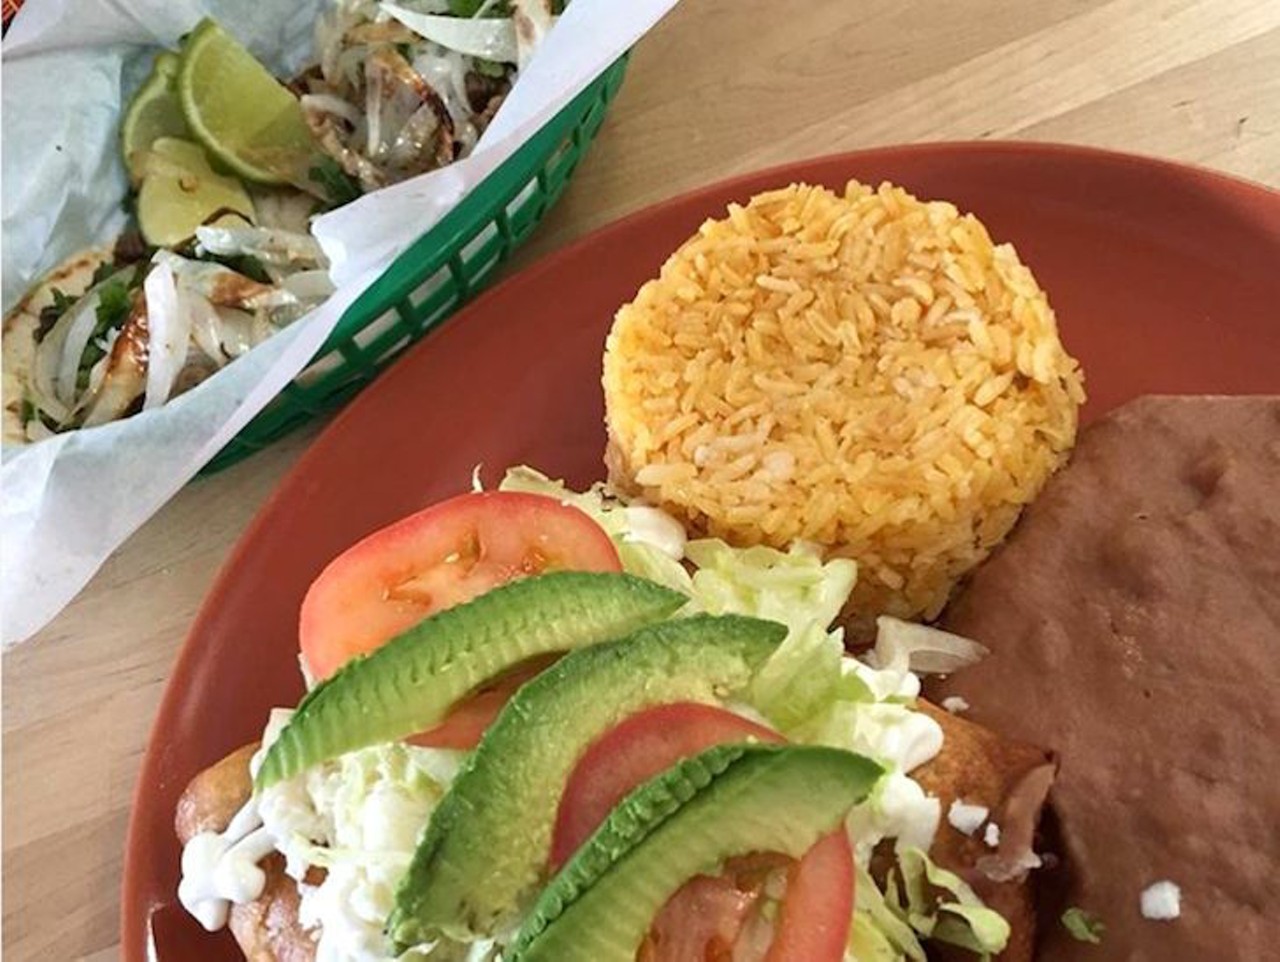 Las Cazuelas
4024 S. Conway Road, 407-250-4608
Tucked away in this Conway grocery store is the Las Cazuelas restaurant. Add on a hearty side order of rice and beans to your $1.75 taco order to complete the experience.
Photo via casey_sliwastudios/Instagram